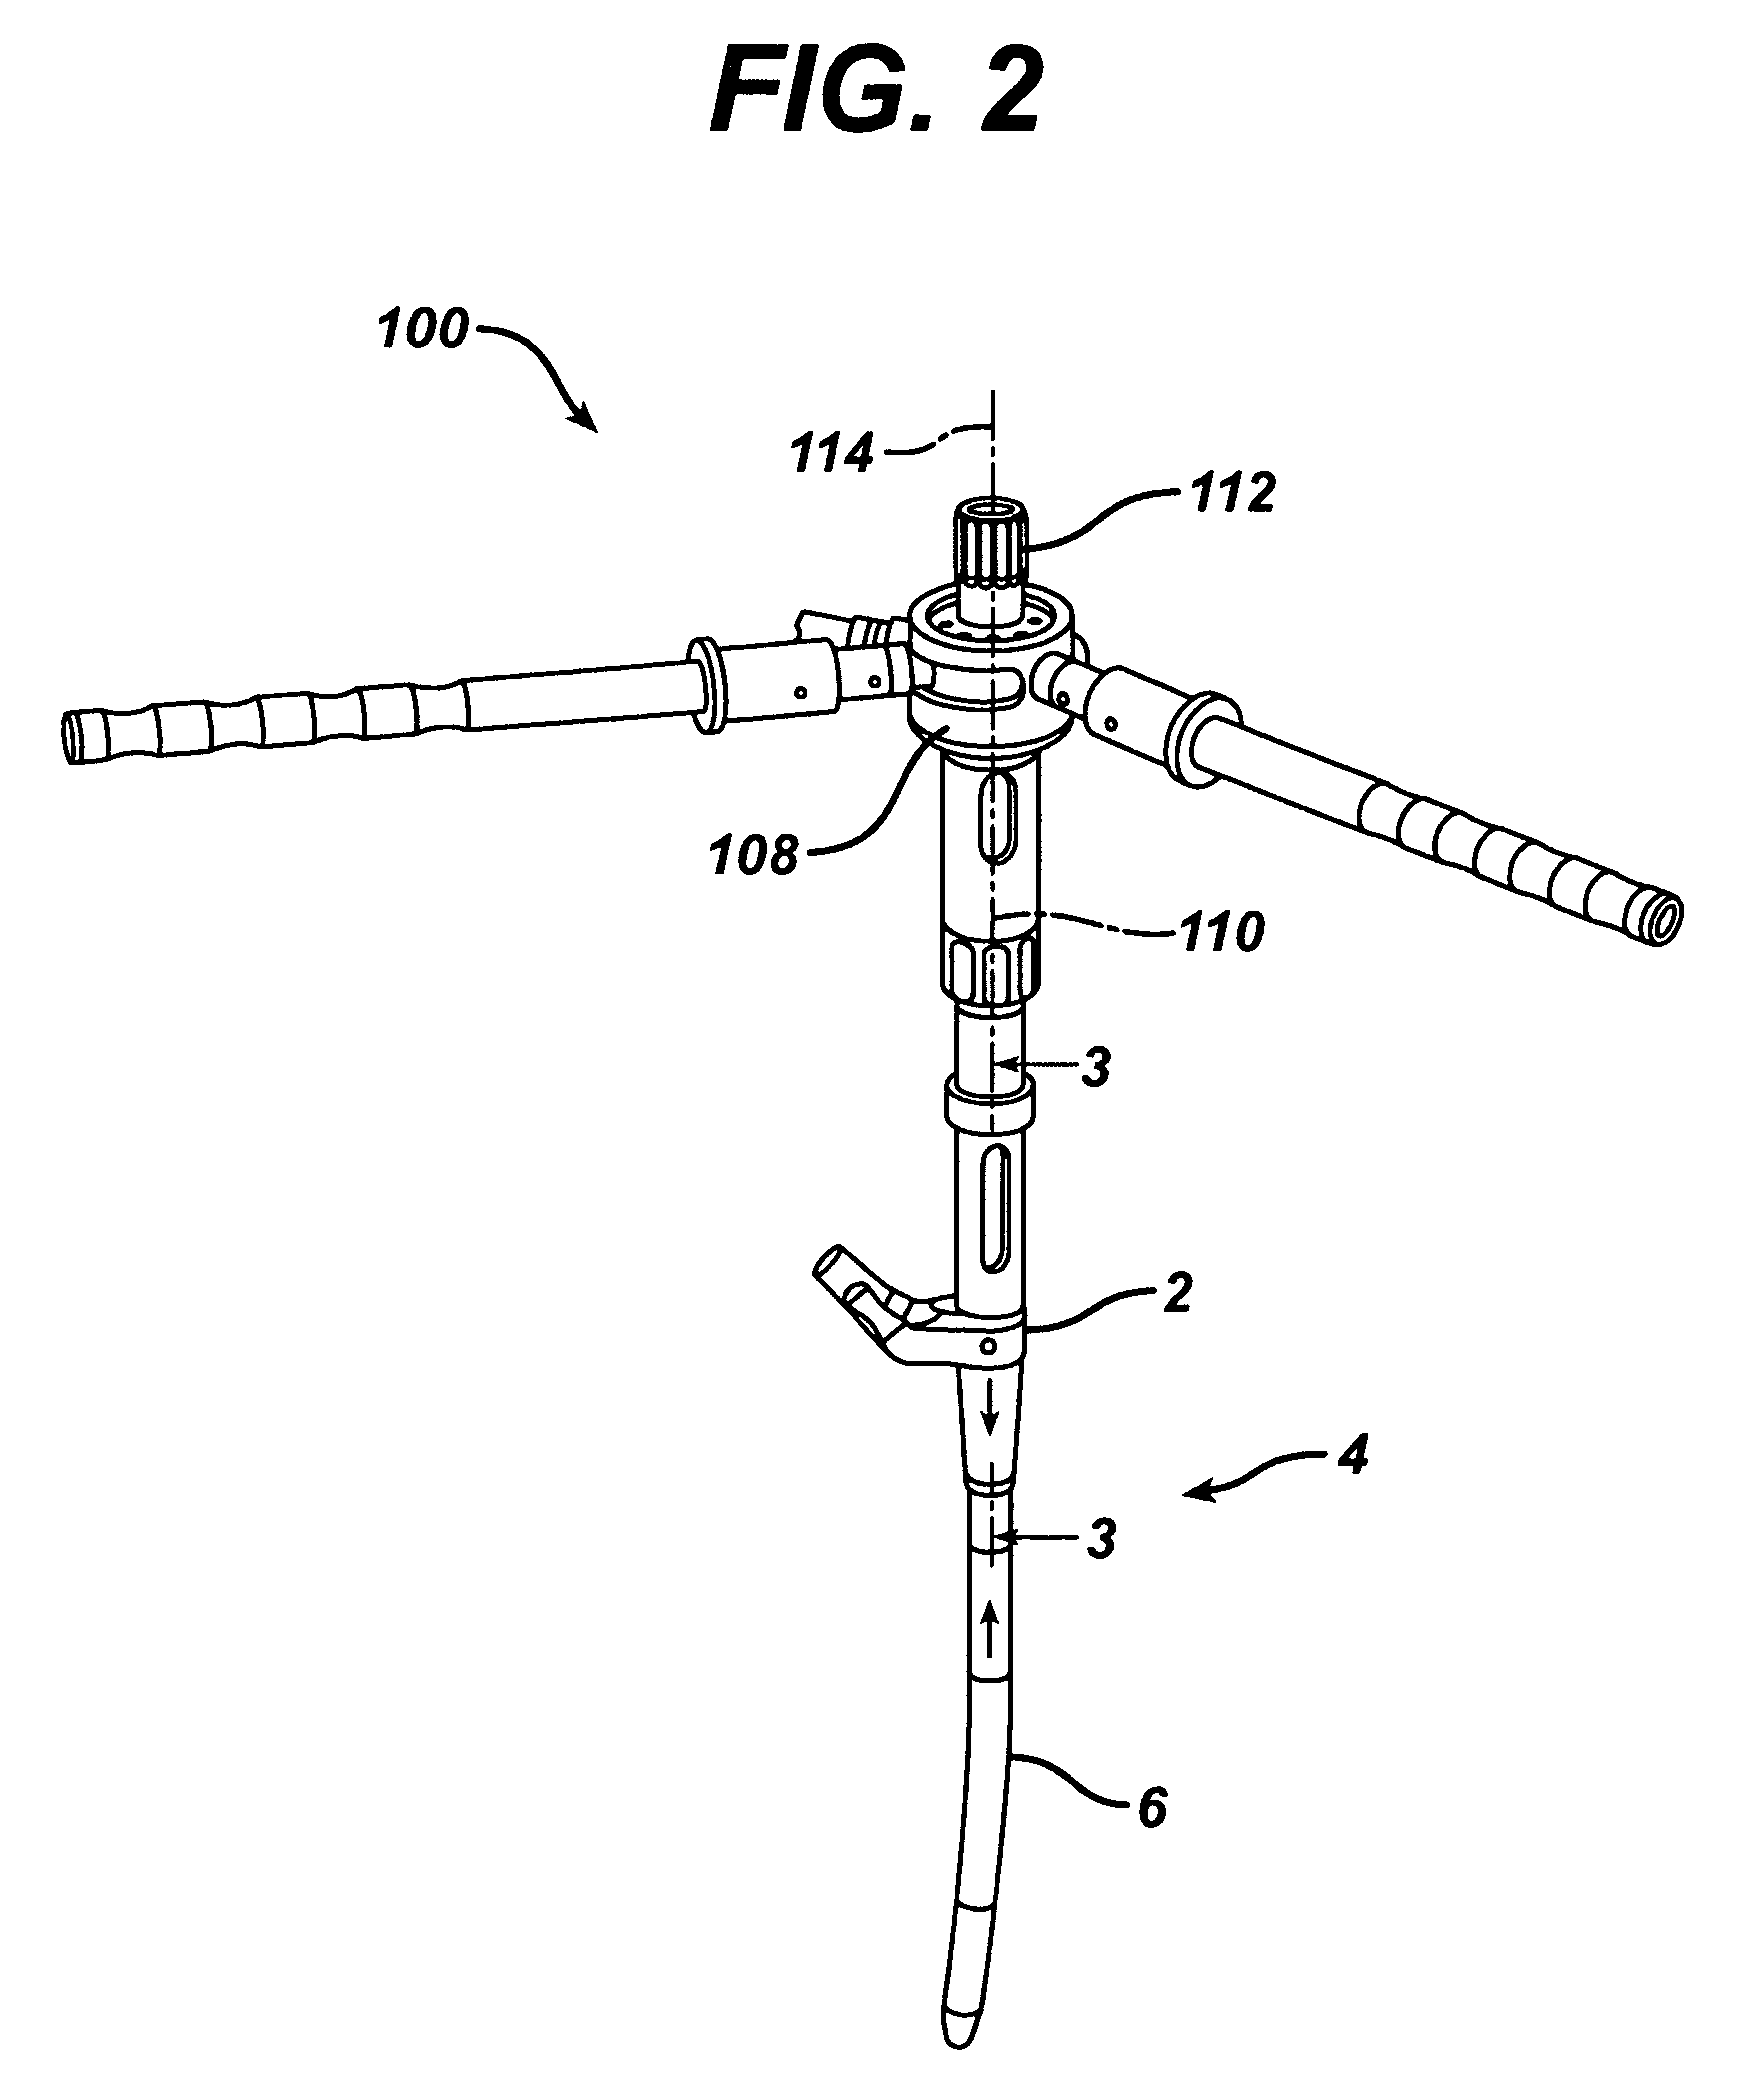 Assembly tool for modular implants and associated method